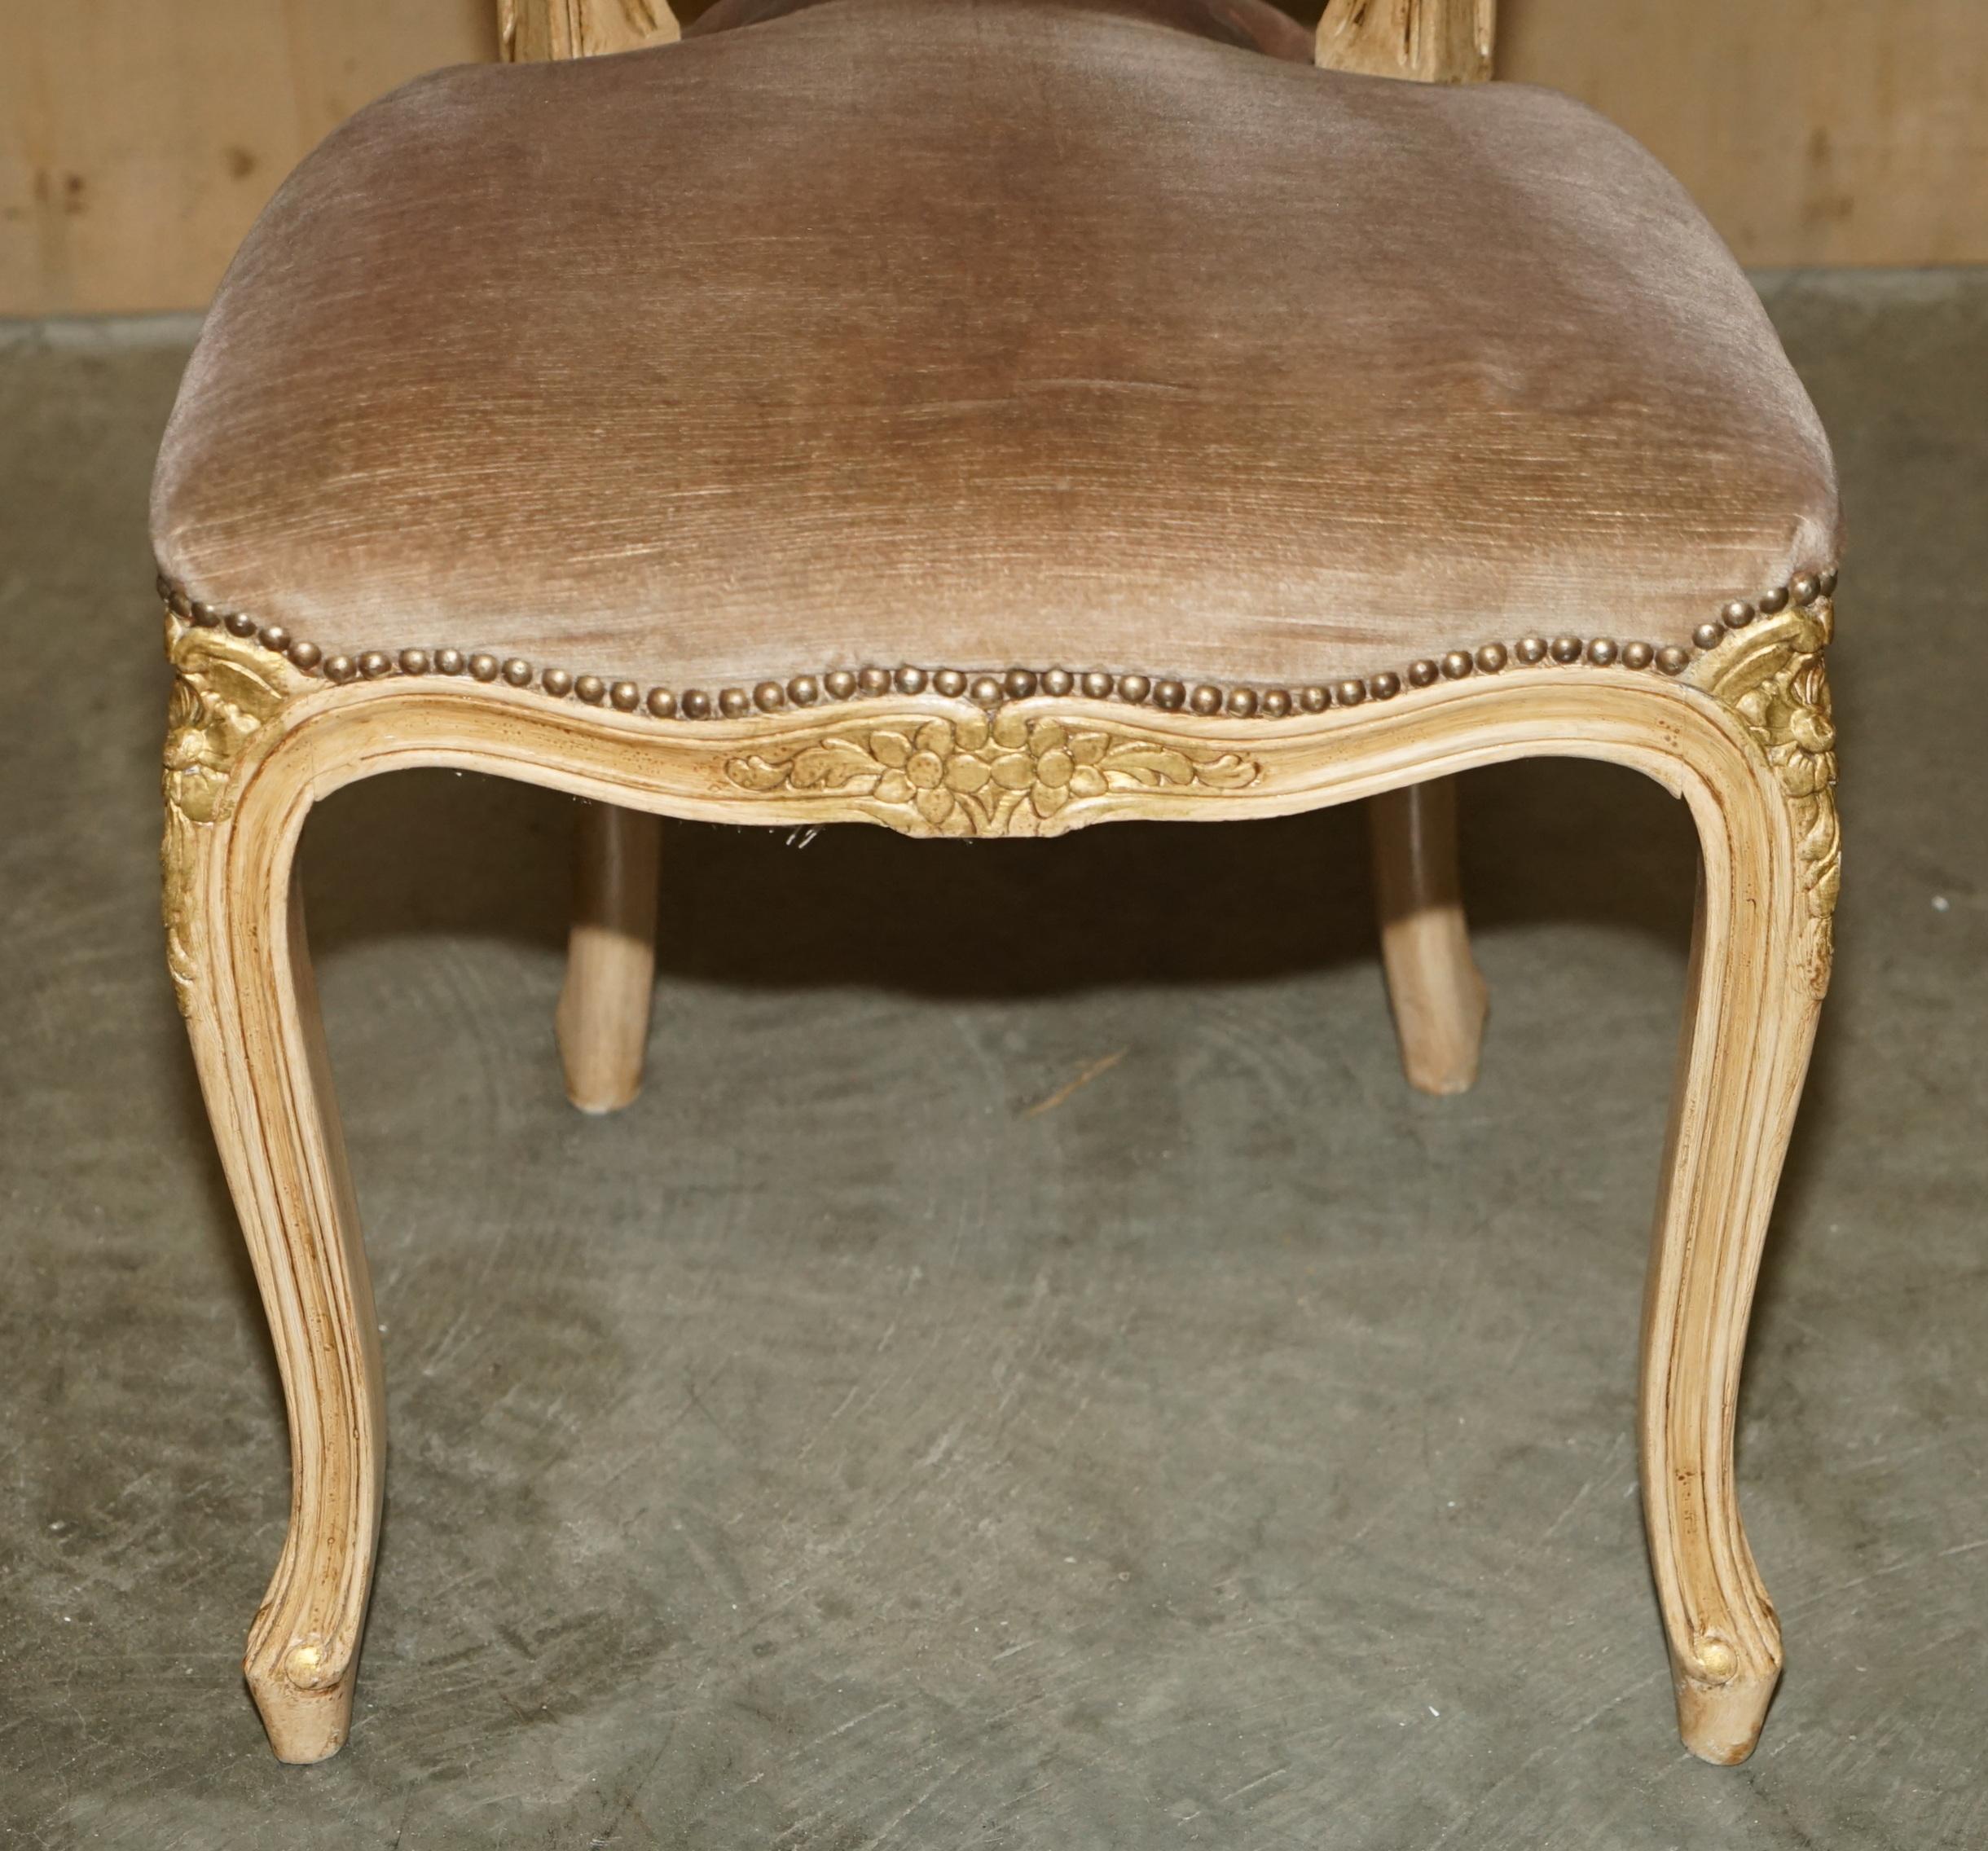 FOUR FINE ANTIQUE FRENCH BERGERE DiNING CHAIRS WITH PERIOD VELOUR UPHOLSTERY For Sale 10